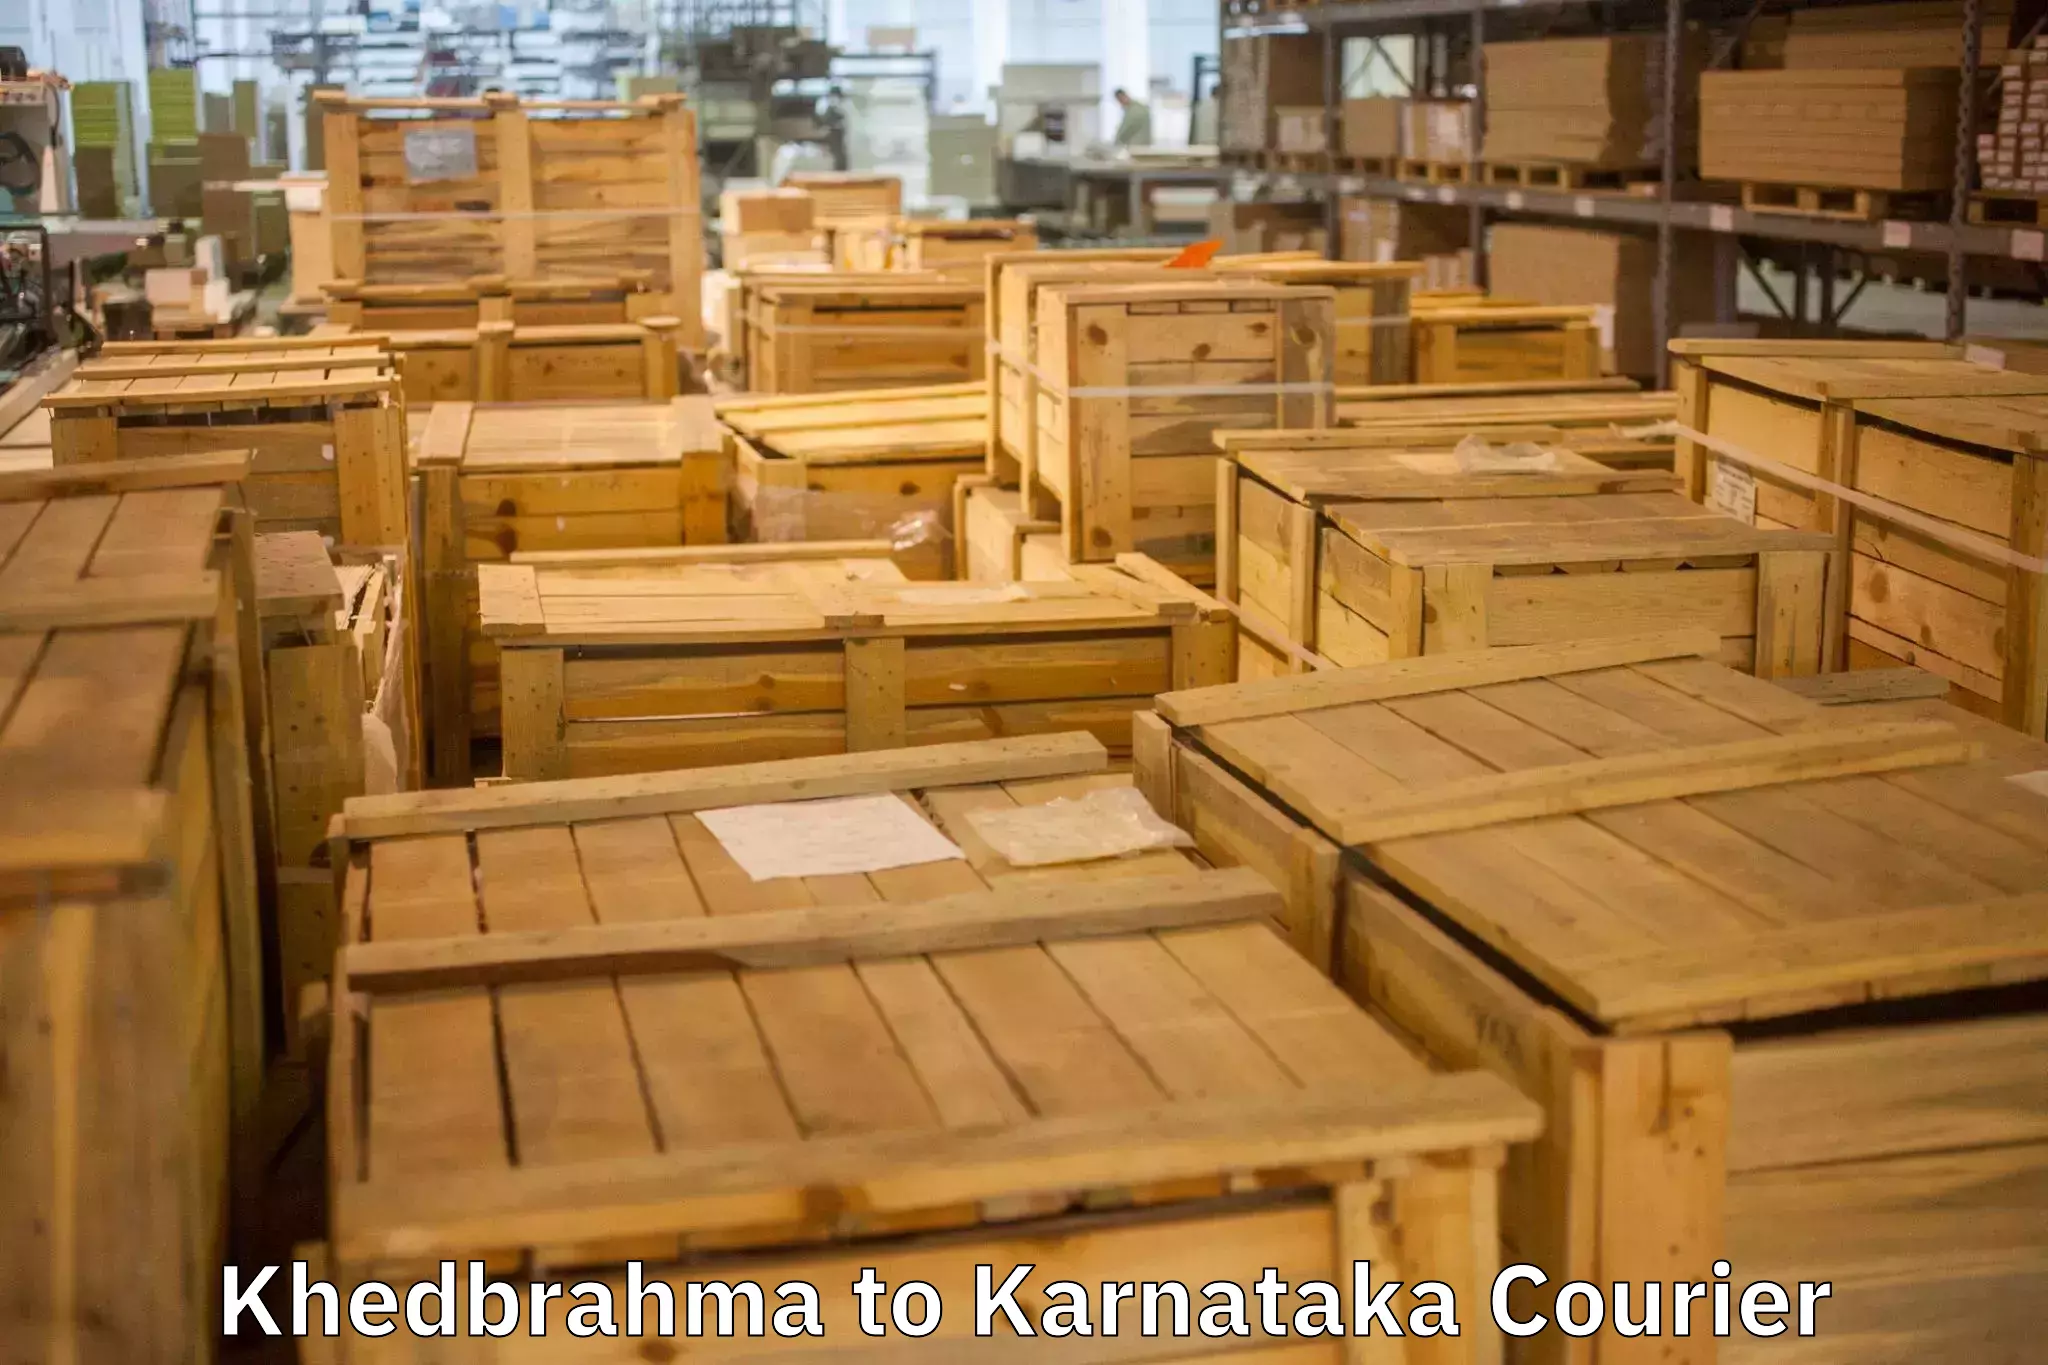 Reliable movers Khedbrahma to Kollegal